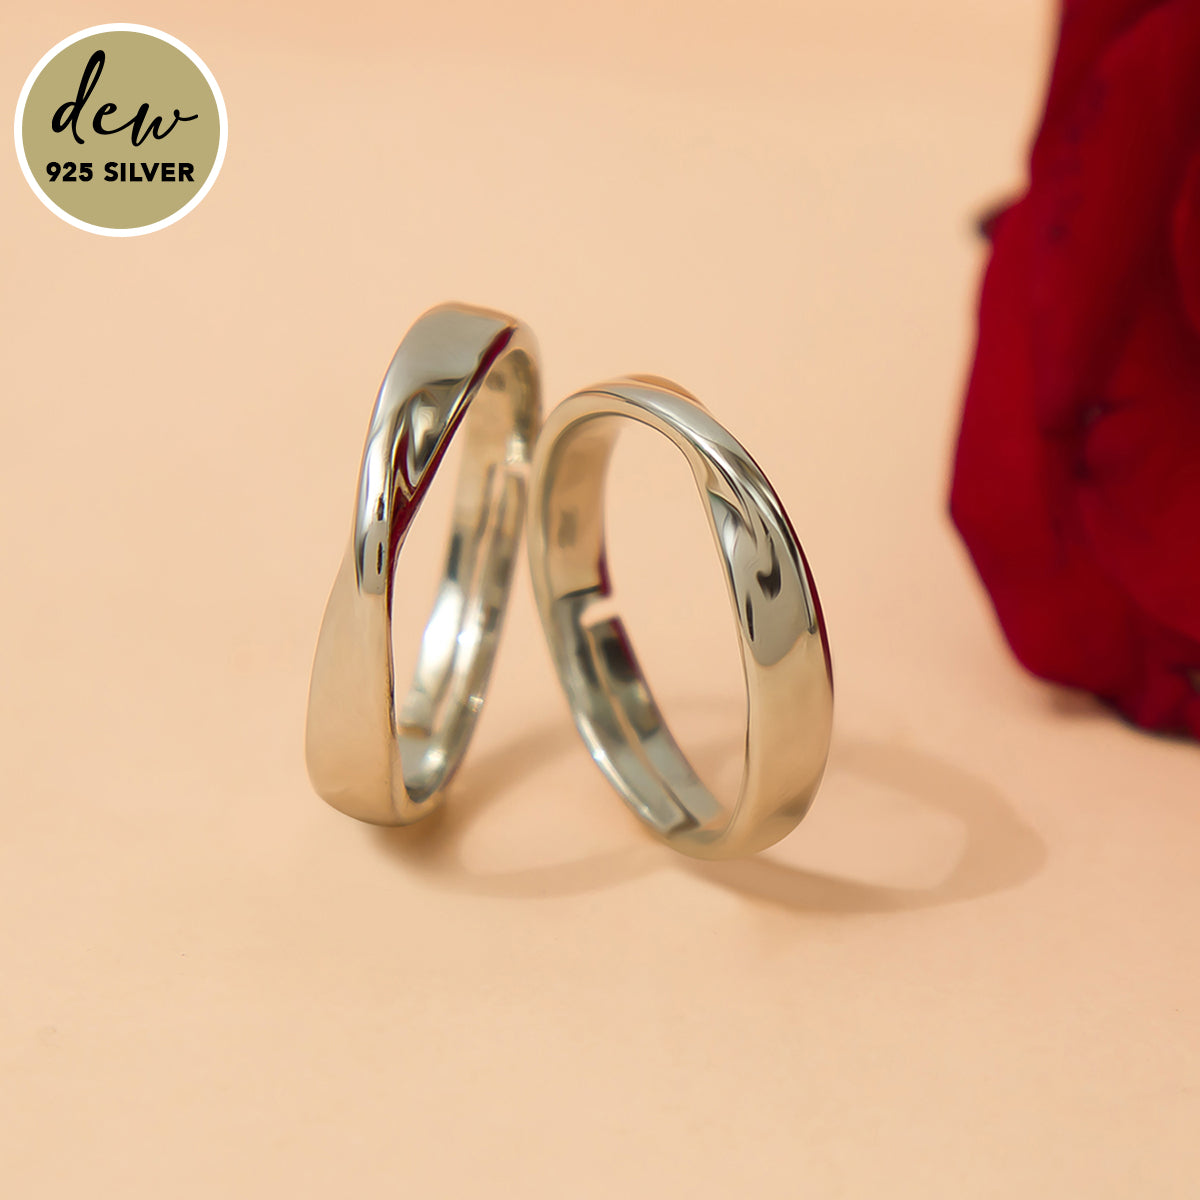 Dew by PB Rhodium Forever Band Couple Adjustable Sterling Silver Rings(One Size)